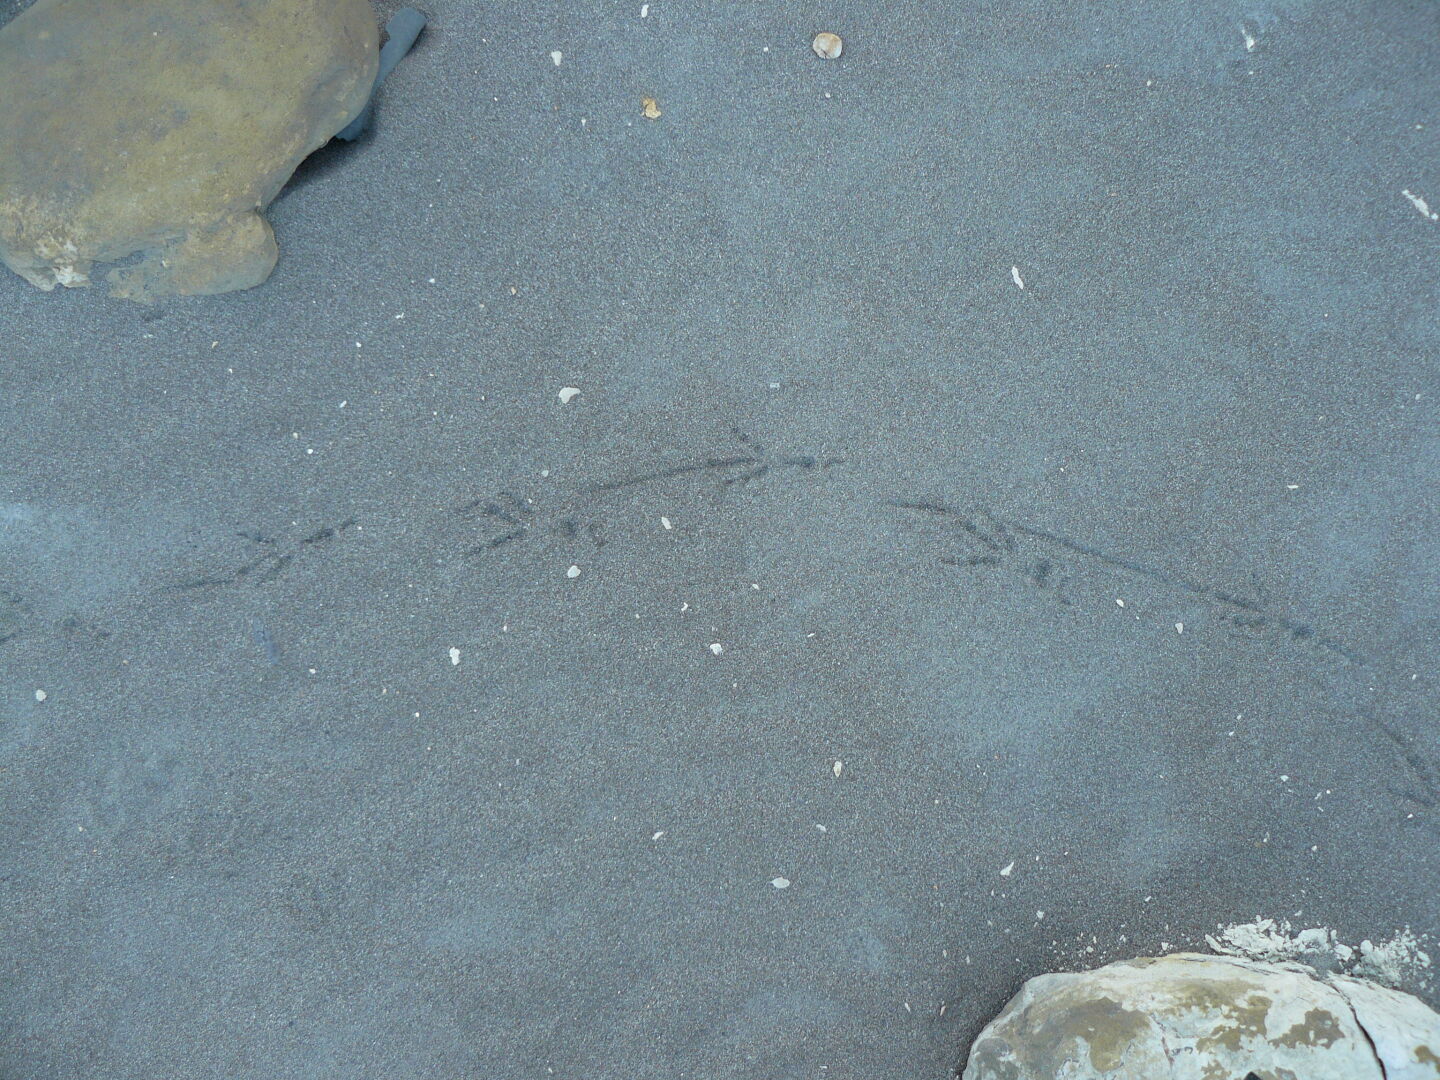 Bird tracks in the sand. The sand's dark colour is a reminder of the coal mining that took place here until only 20 years ago. The waste from the mines was dumped over the cliff edges.